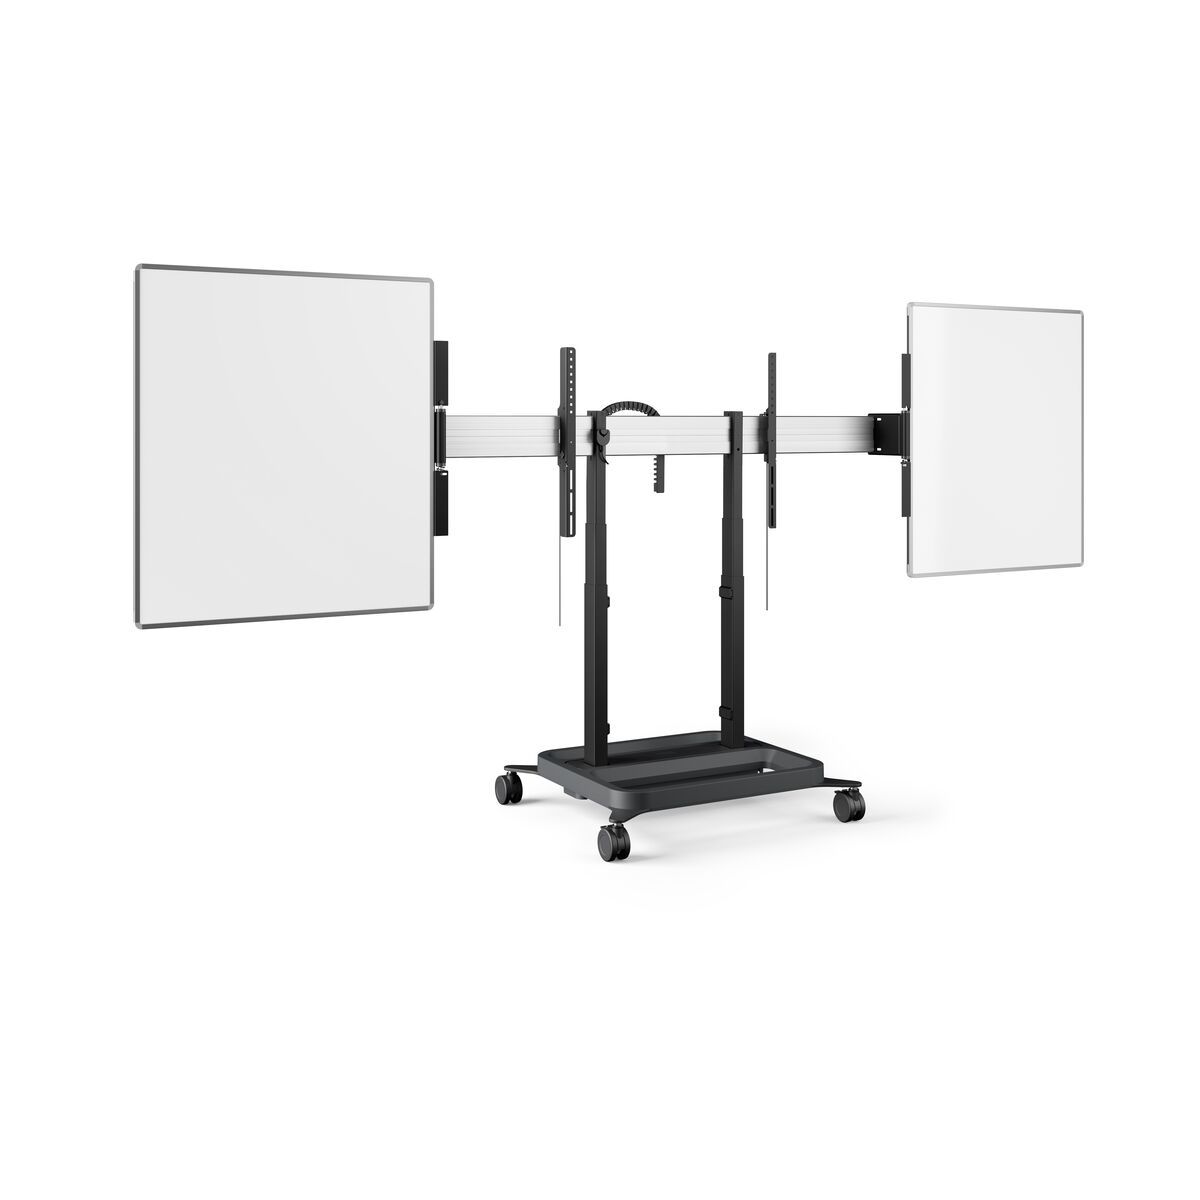 VOGELS RISE A227 - Whiteboard set 75 inch for motorised RISE stands and trolleys